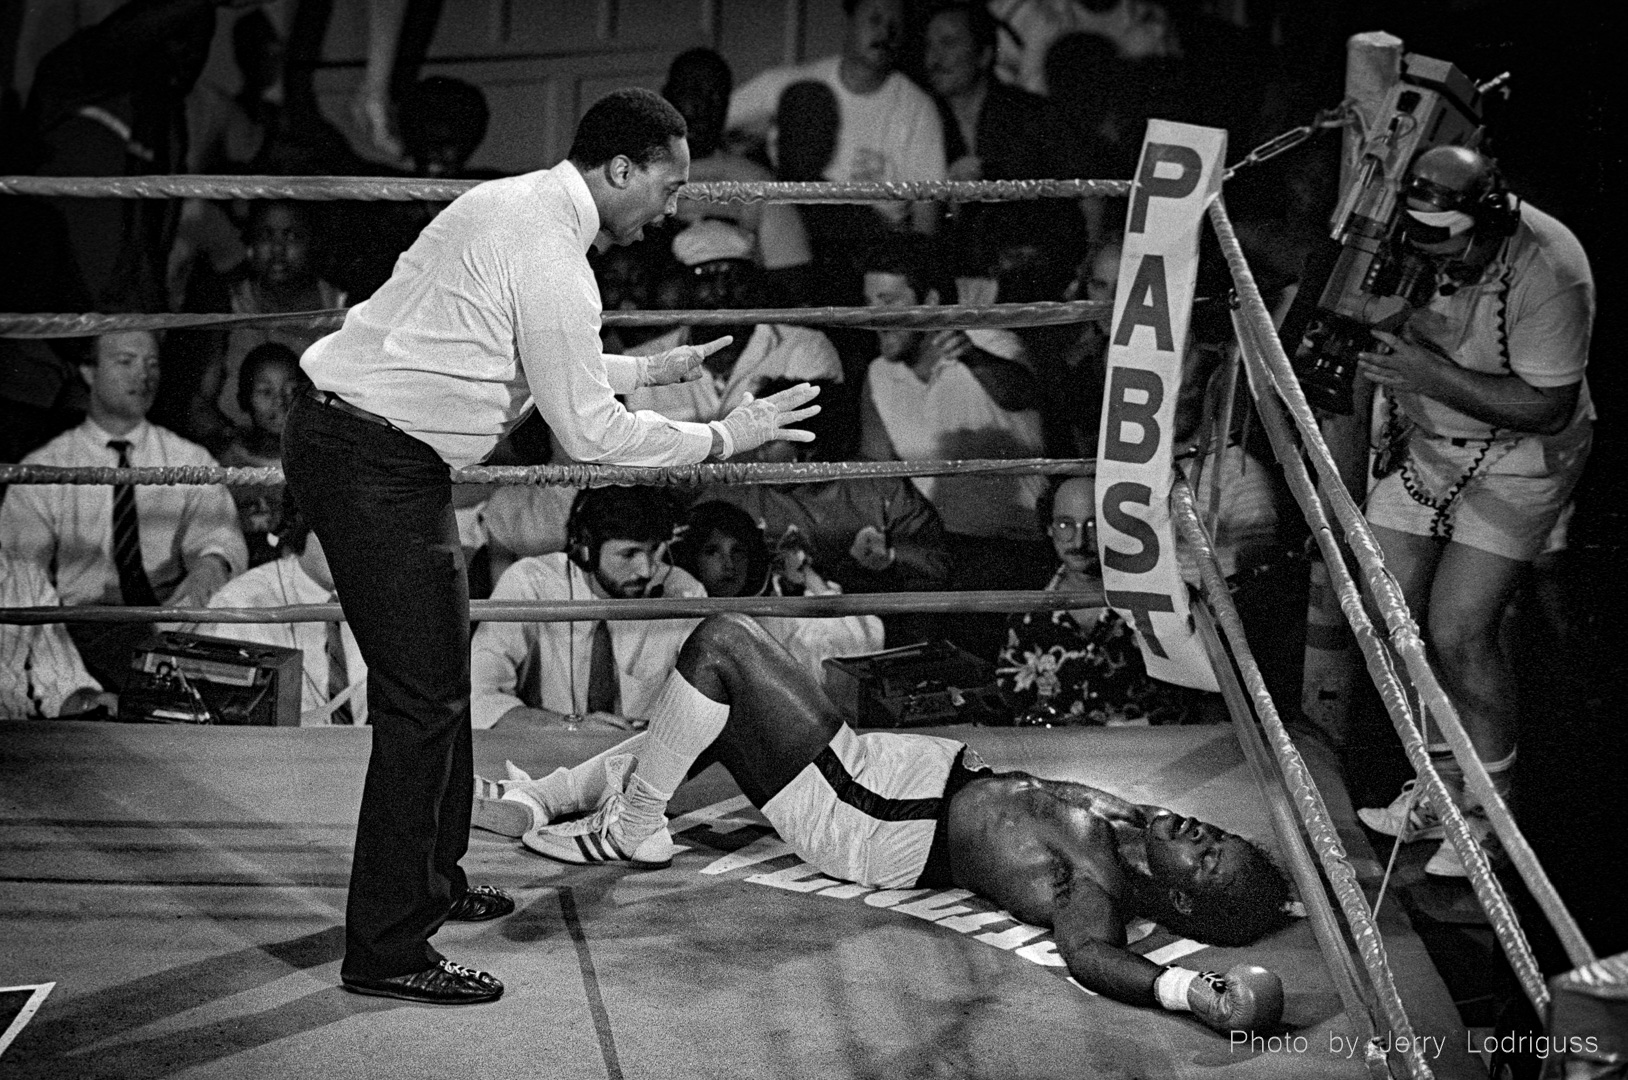 A boxer is knocked out, down on his back on the canvas in the ring, as the referee counts him out.